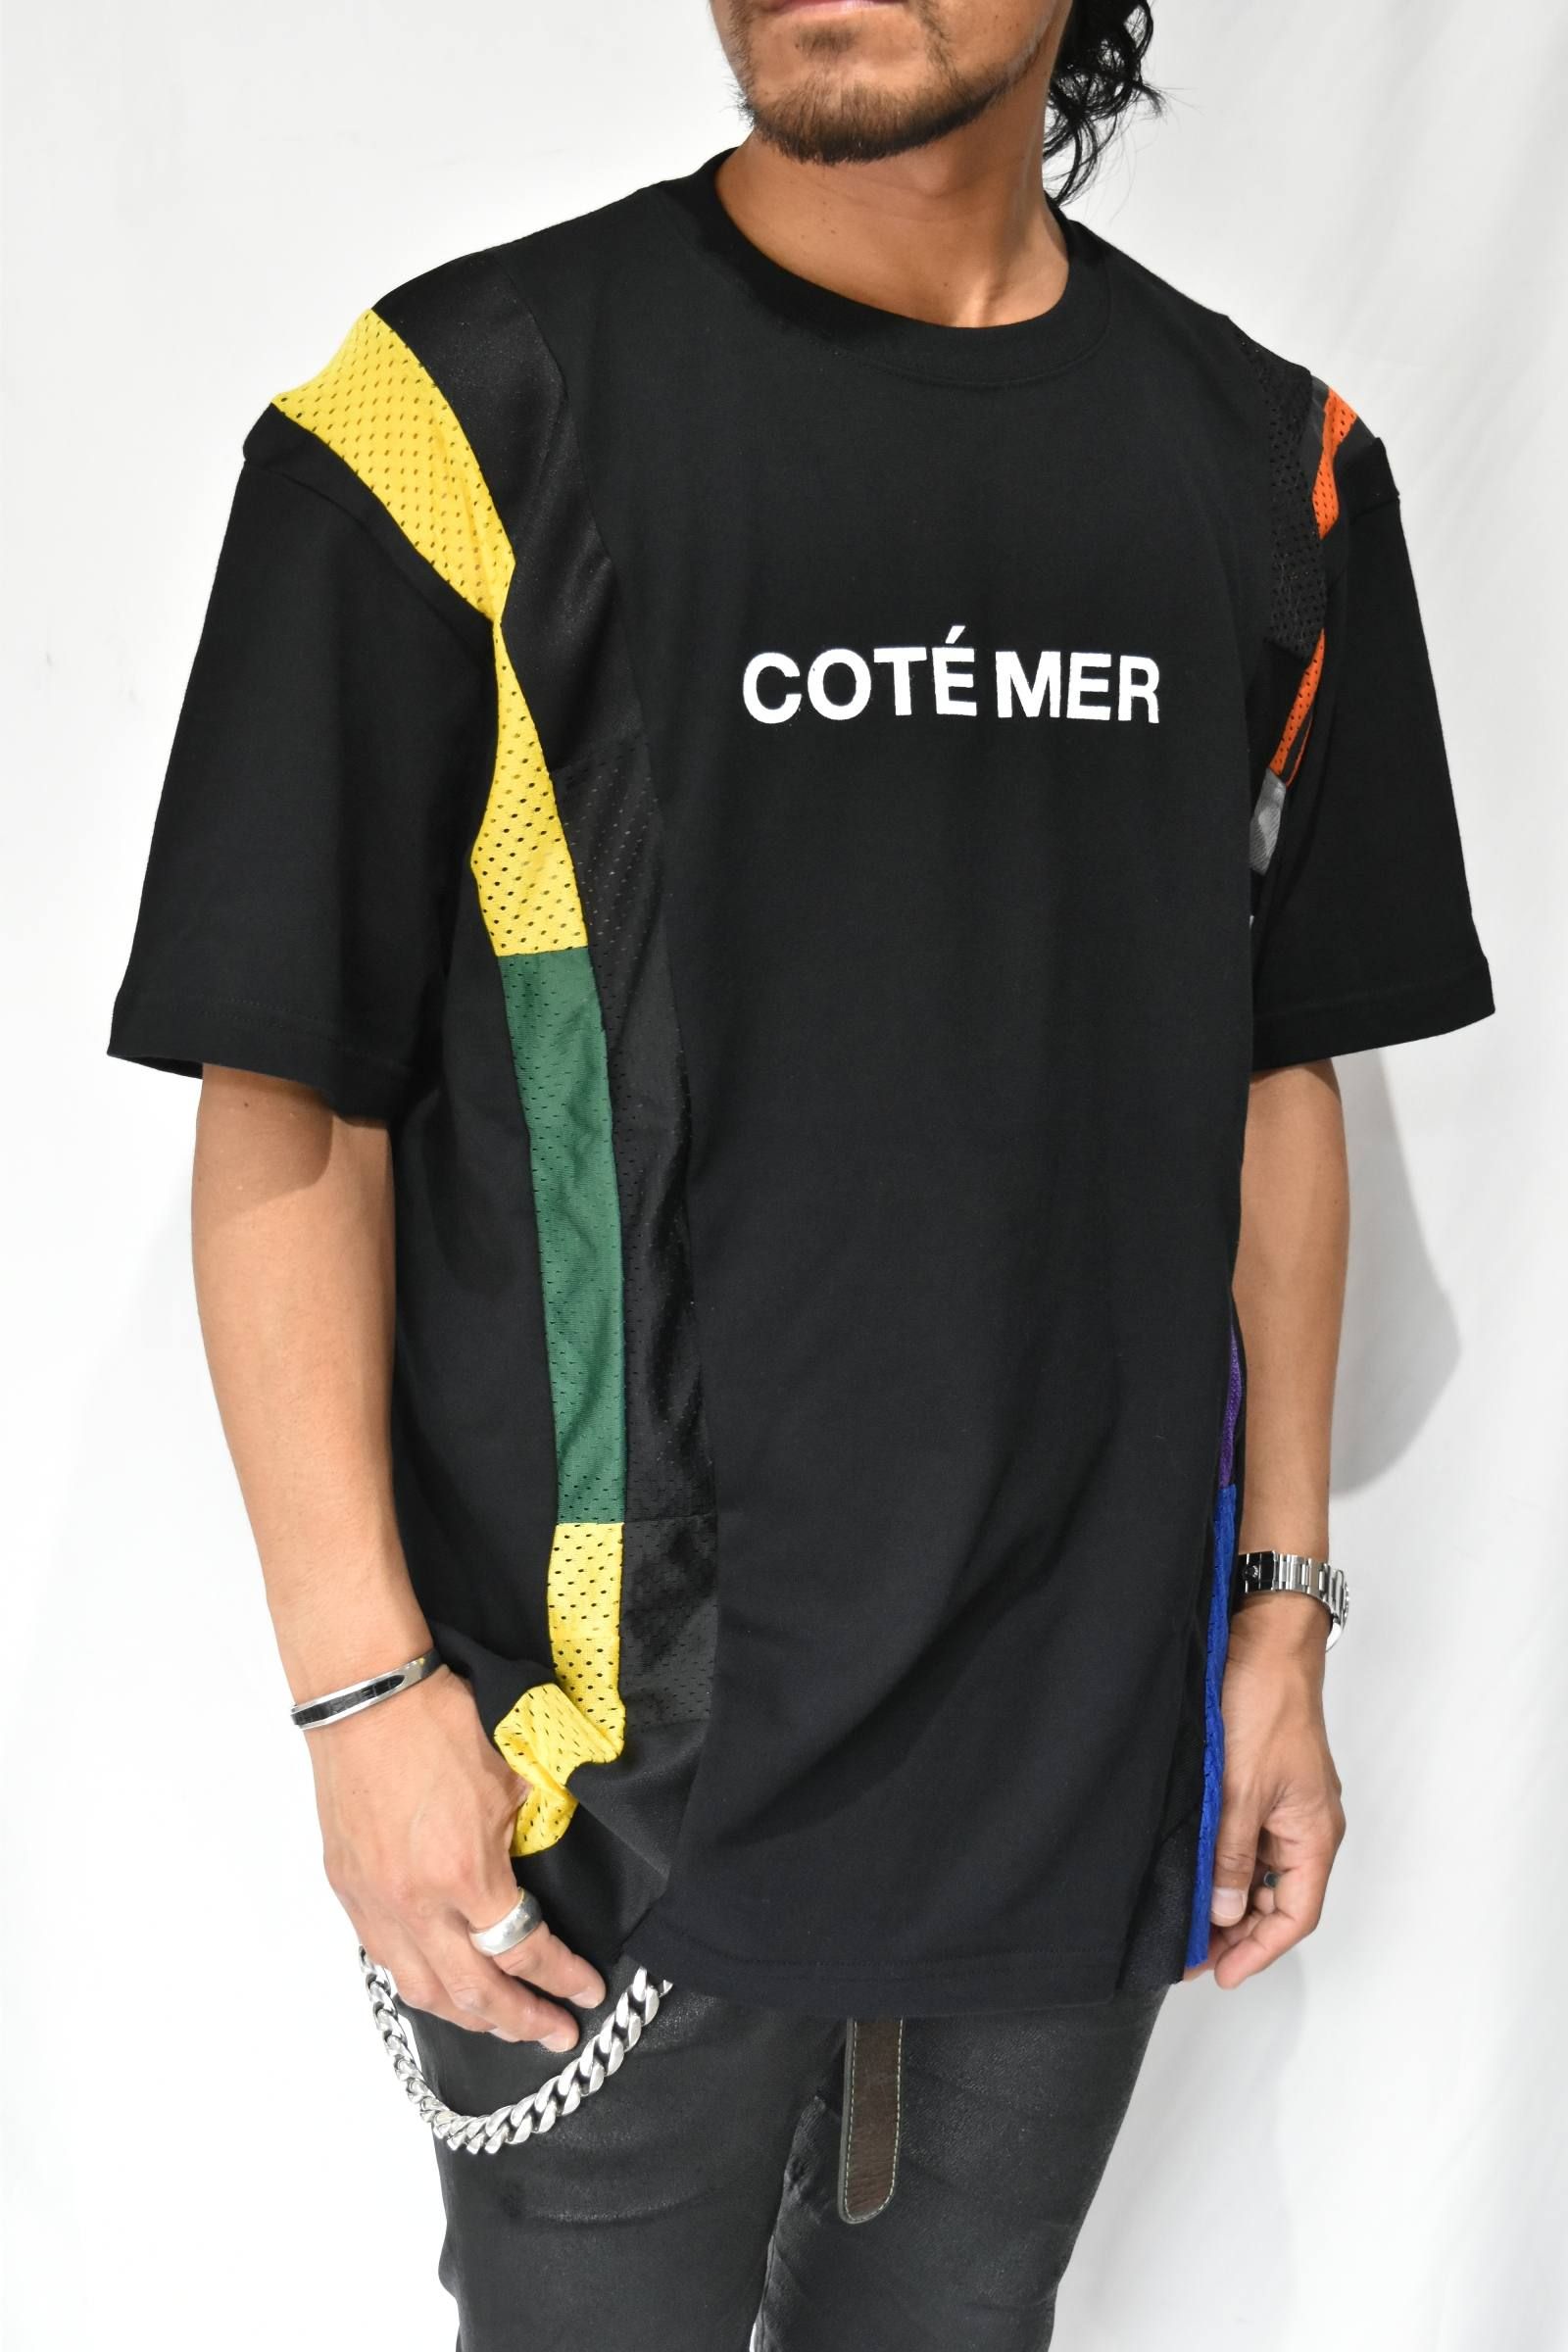 COTE MER - リメイク プリントTシャツ | chord online store